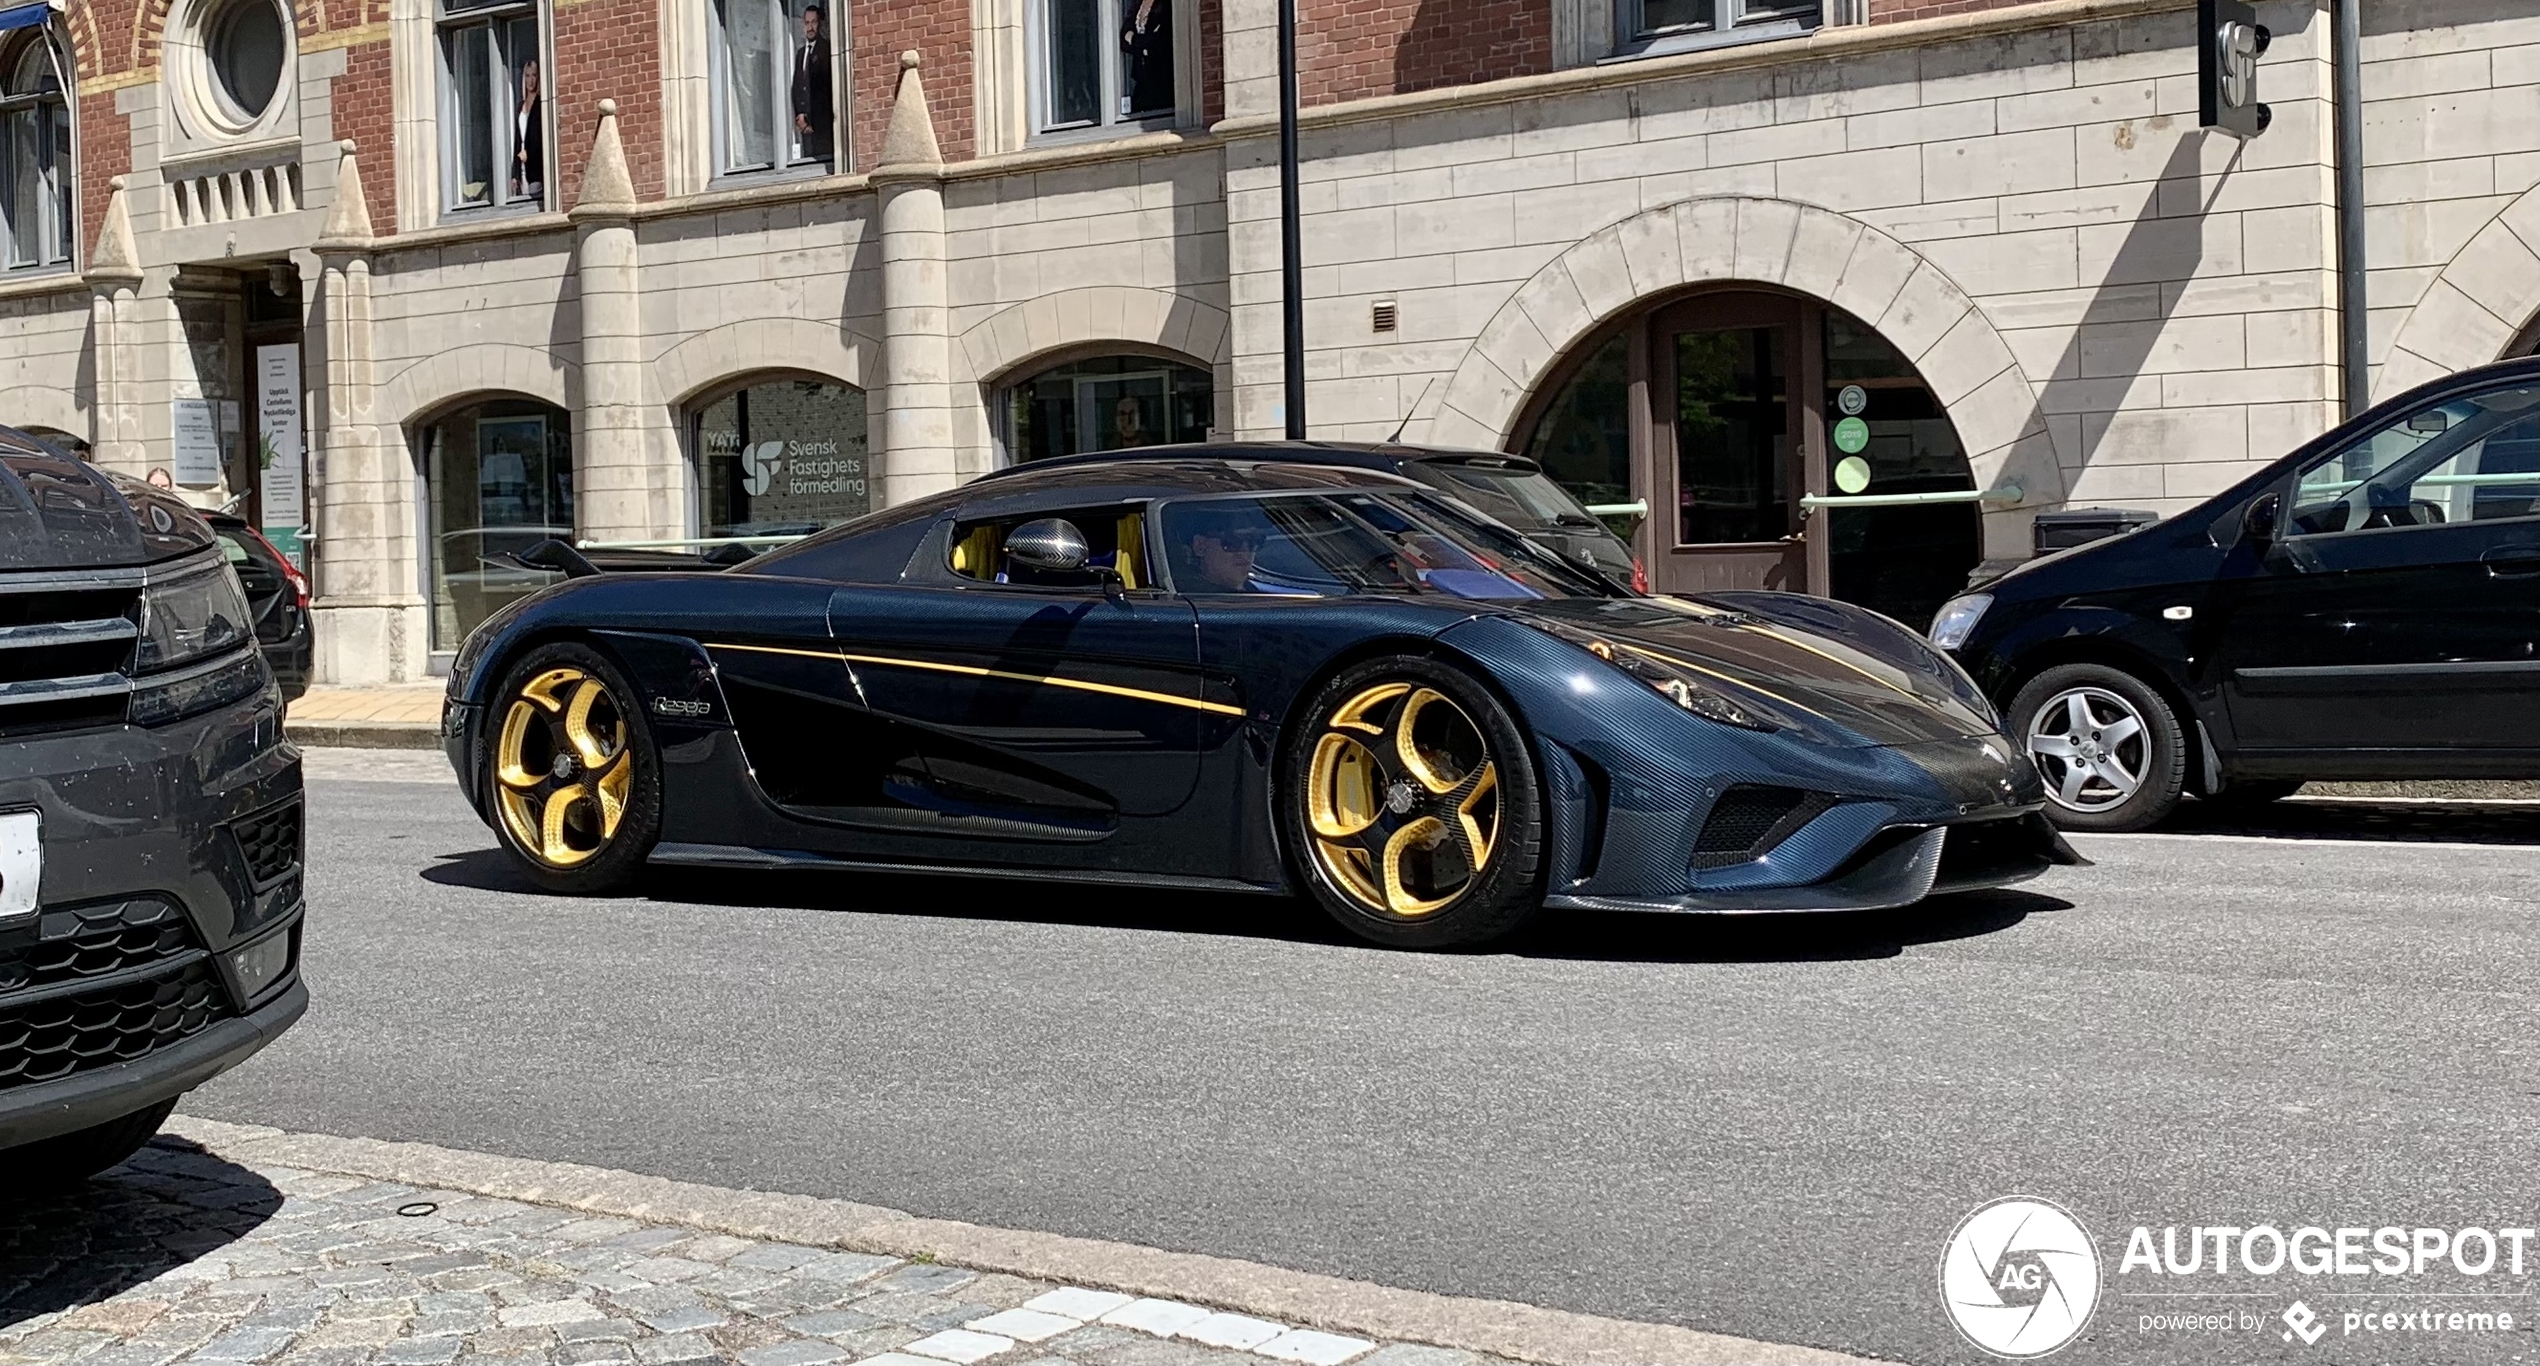 This spotter celebrates his 100th spot with the special Koenigsegg Regera